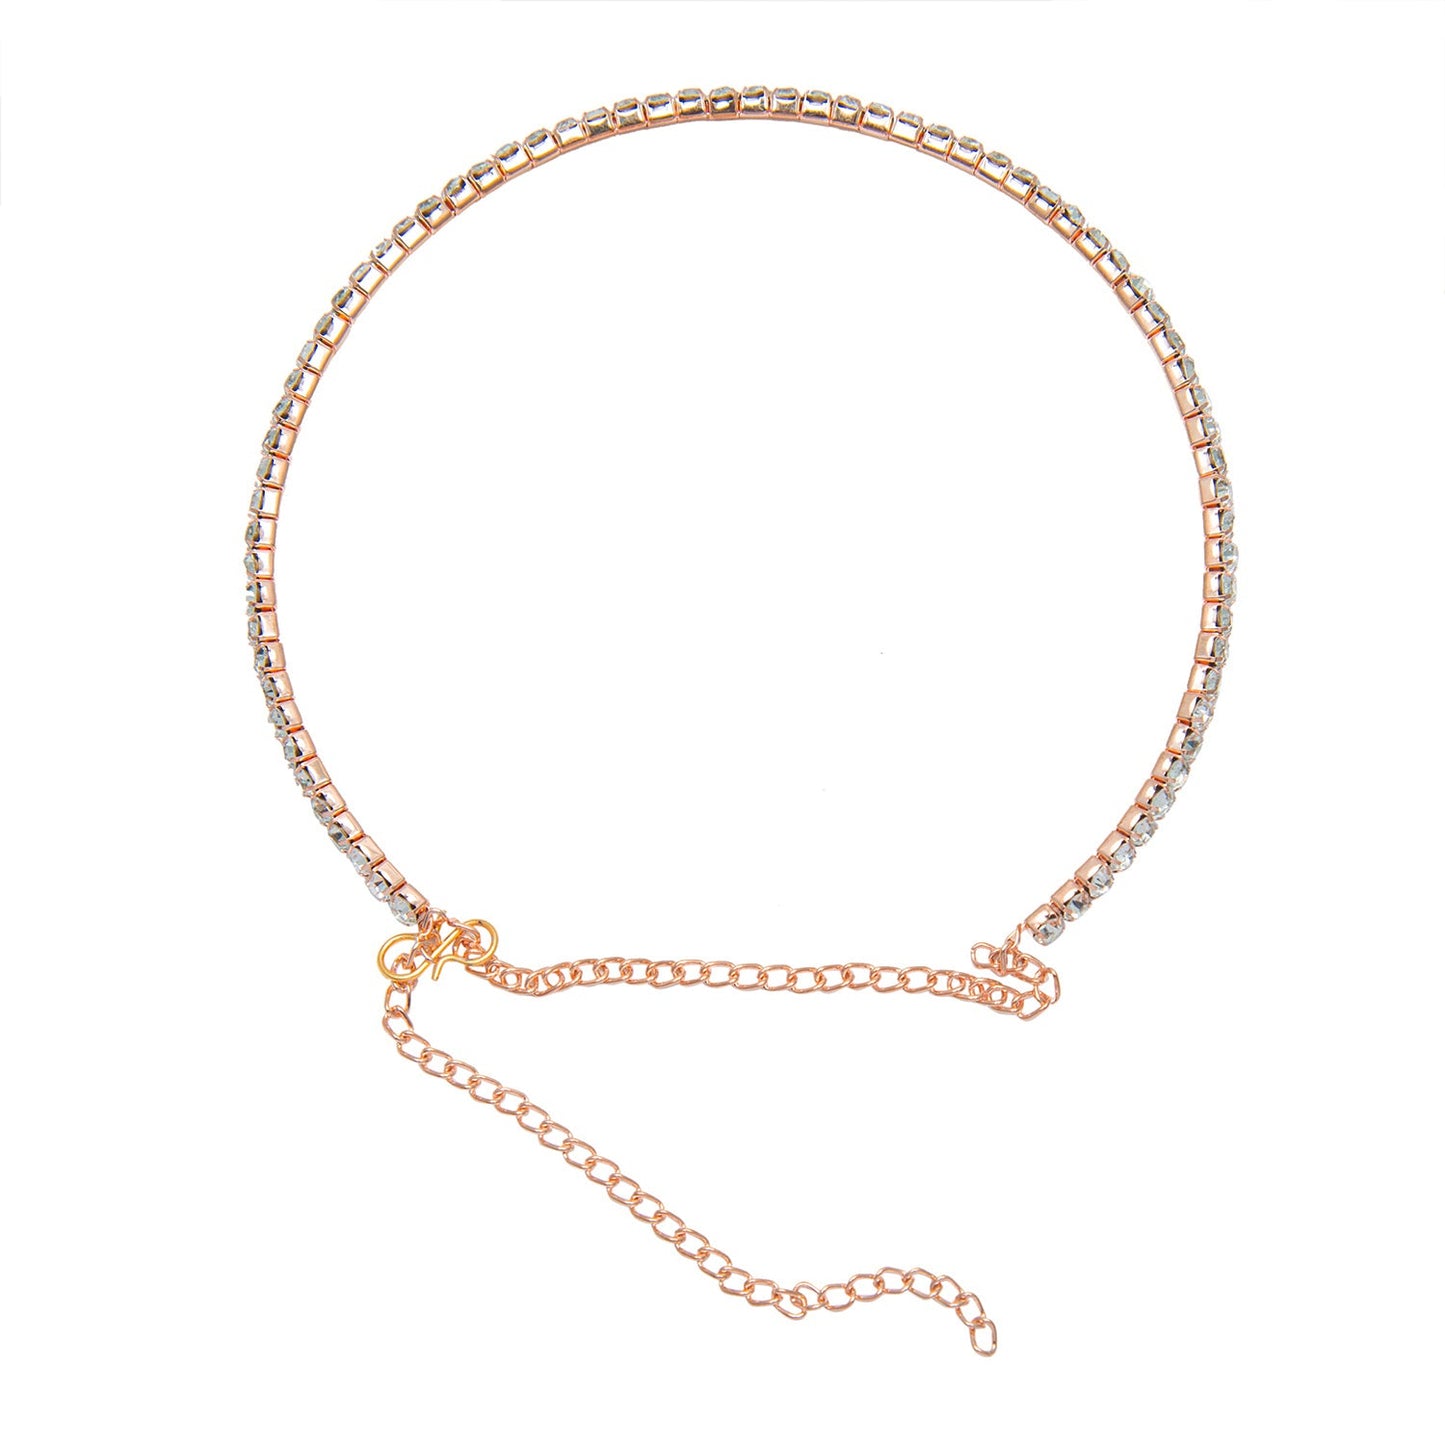 Shining Jewel Rose Gold Plated Western CZ, Crystals & AD Choker Necklace for Women (SJN_53_RG)